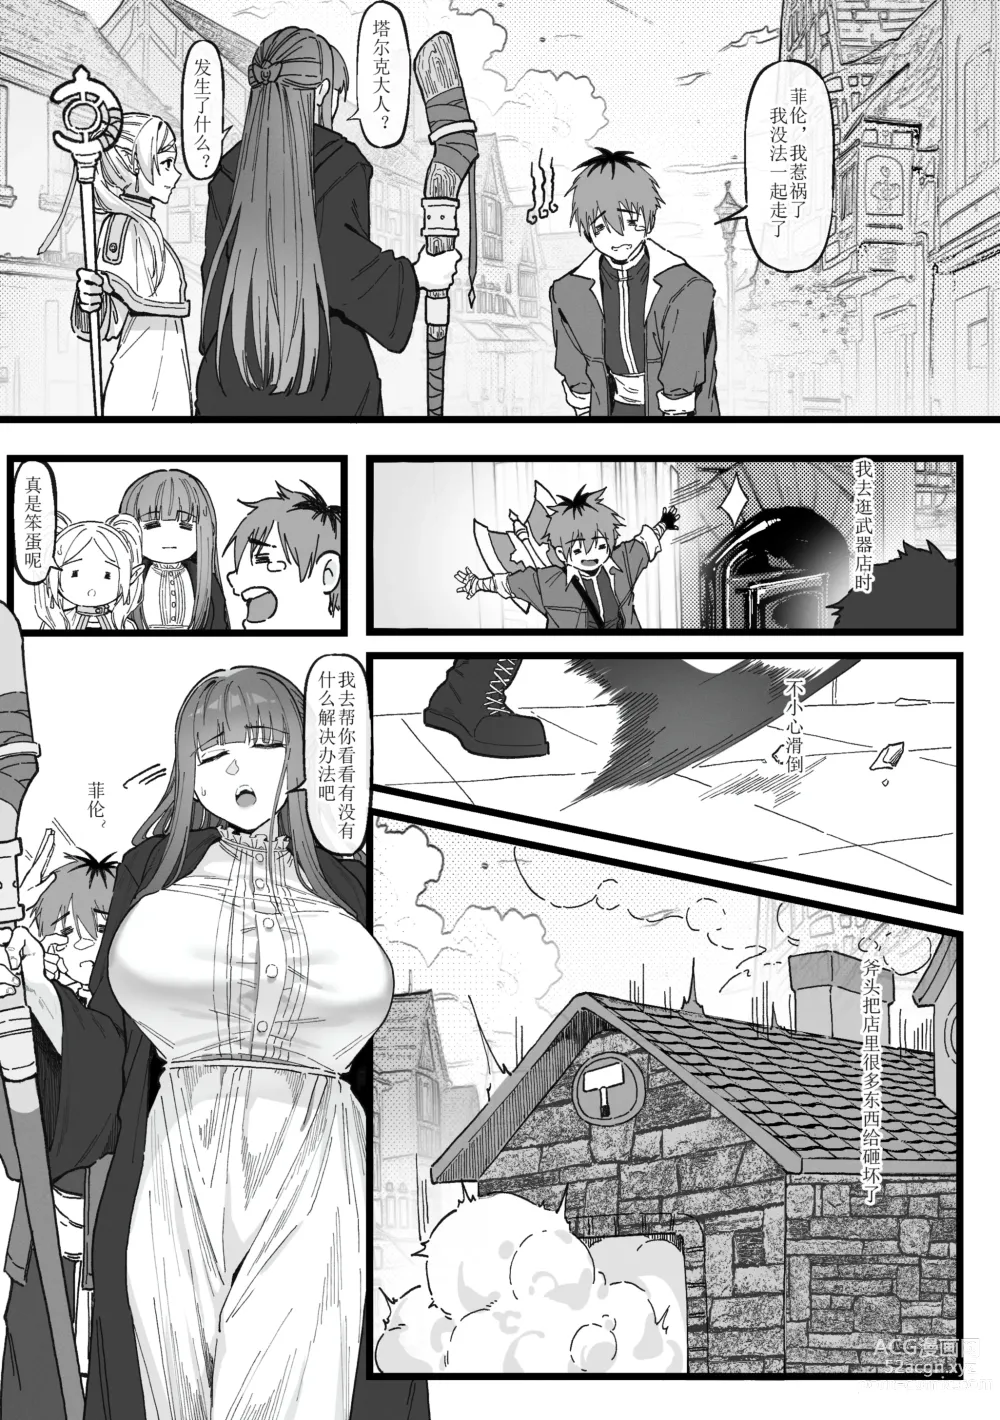 Page 2 of doujinshi 与冒失的塔尔克大人一起冒险 (decensored)